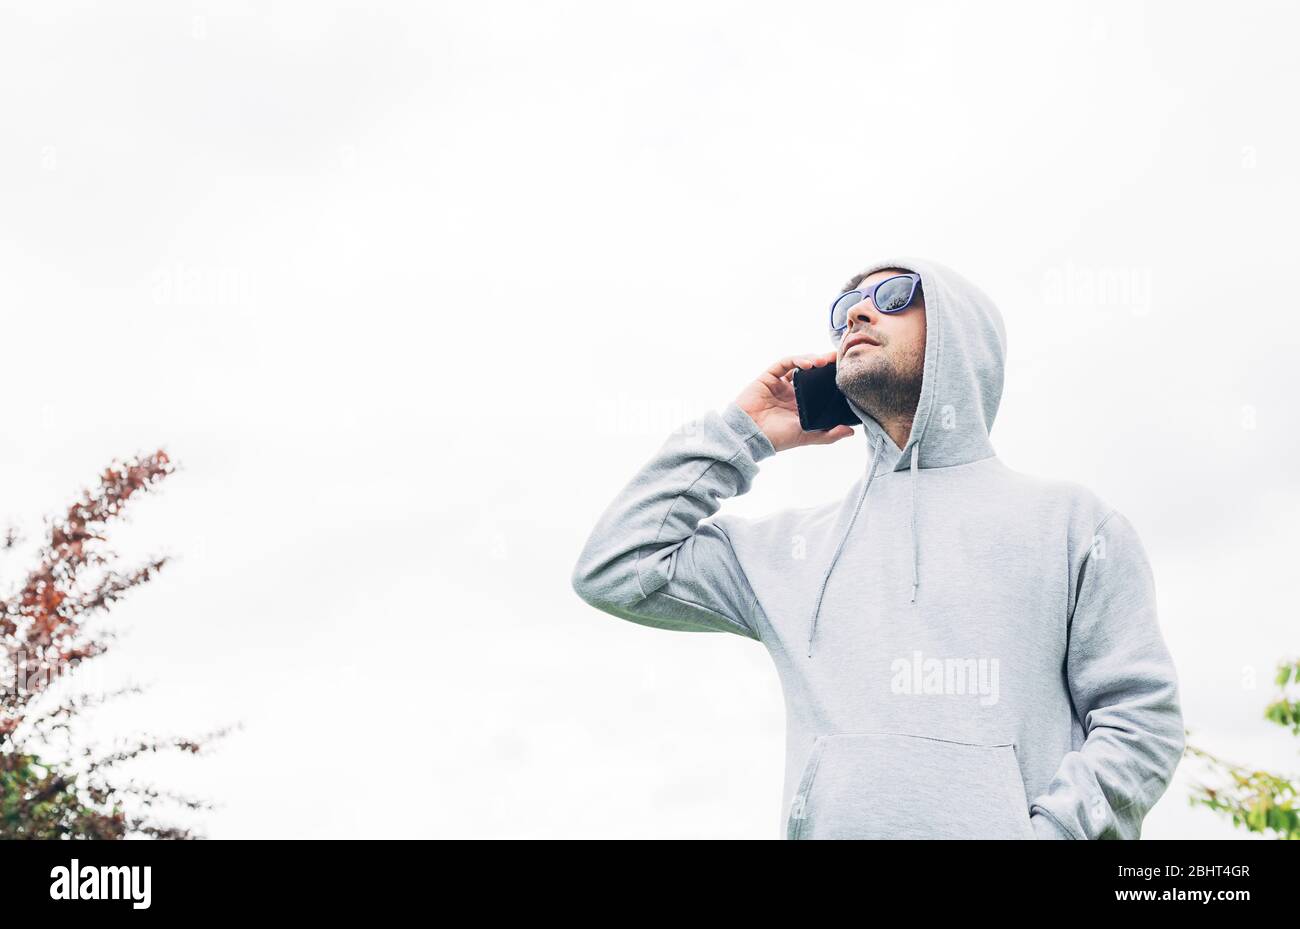 Young man in gray sweatshirt and blue sunglasses holding cell phone in his hands and smiling on a white background Stock Photo